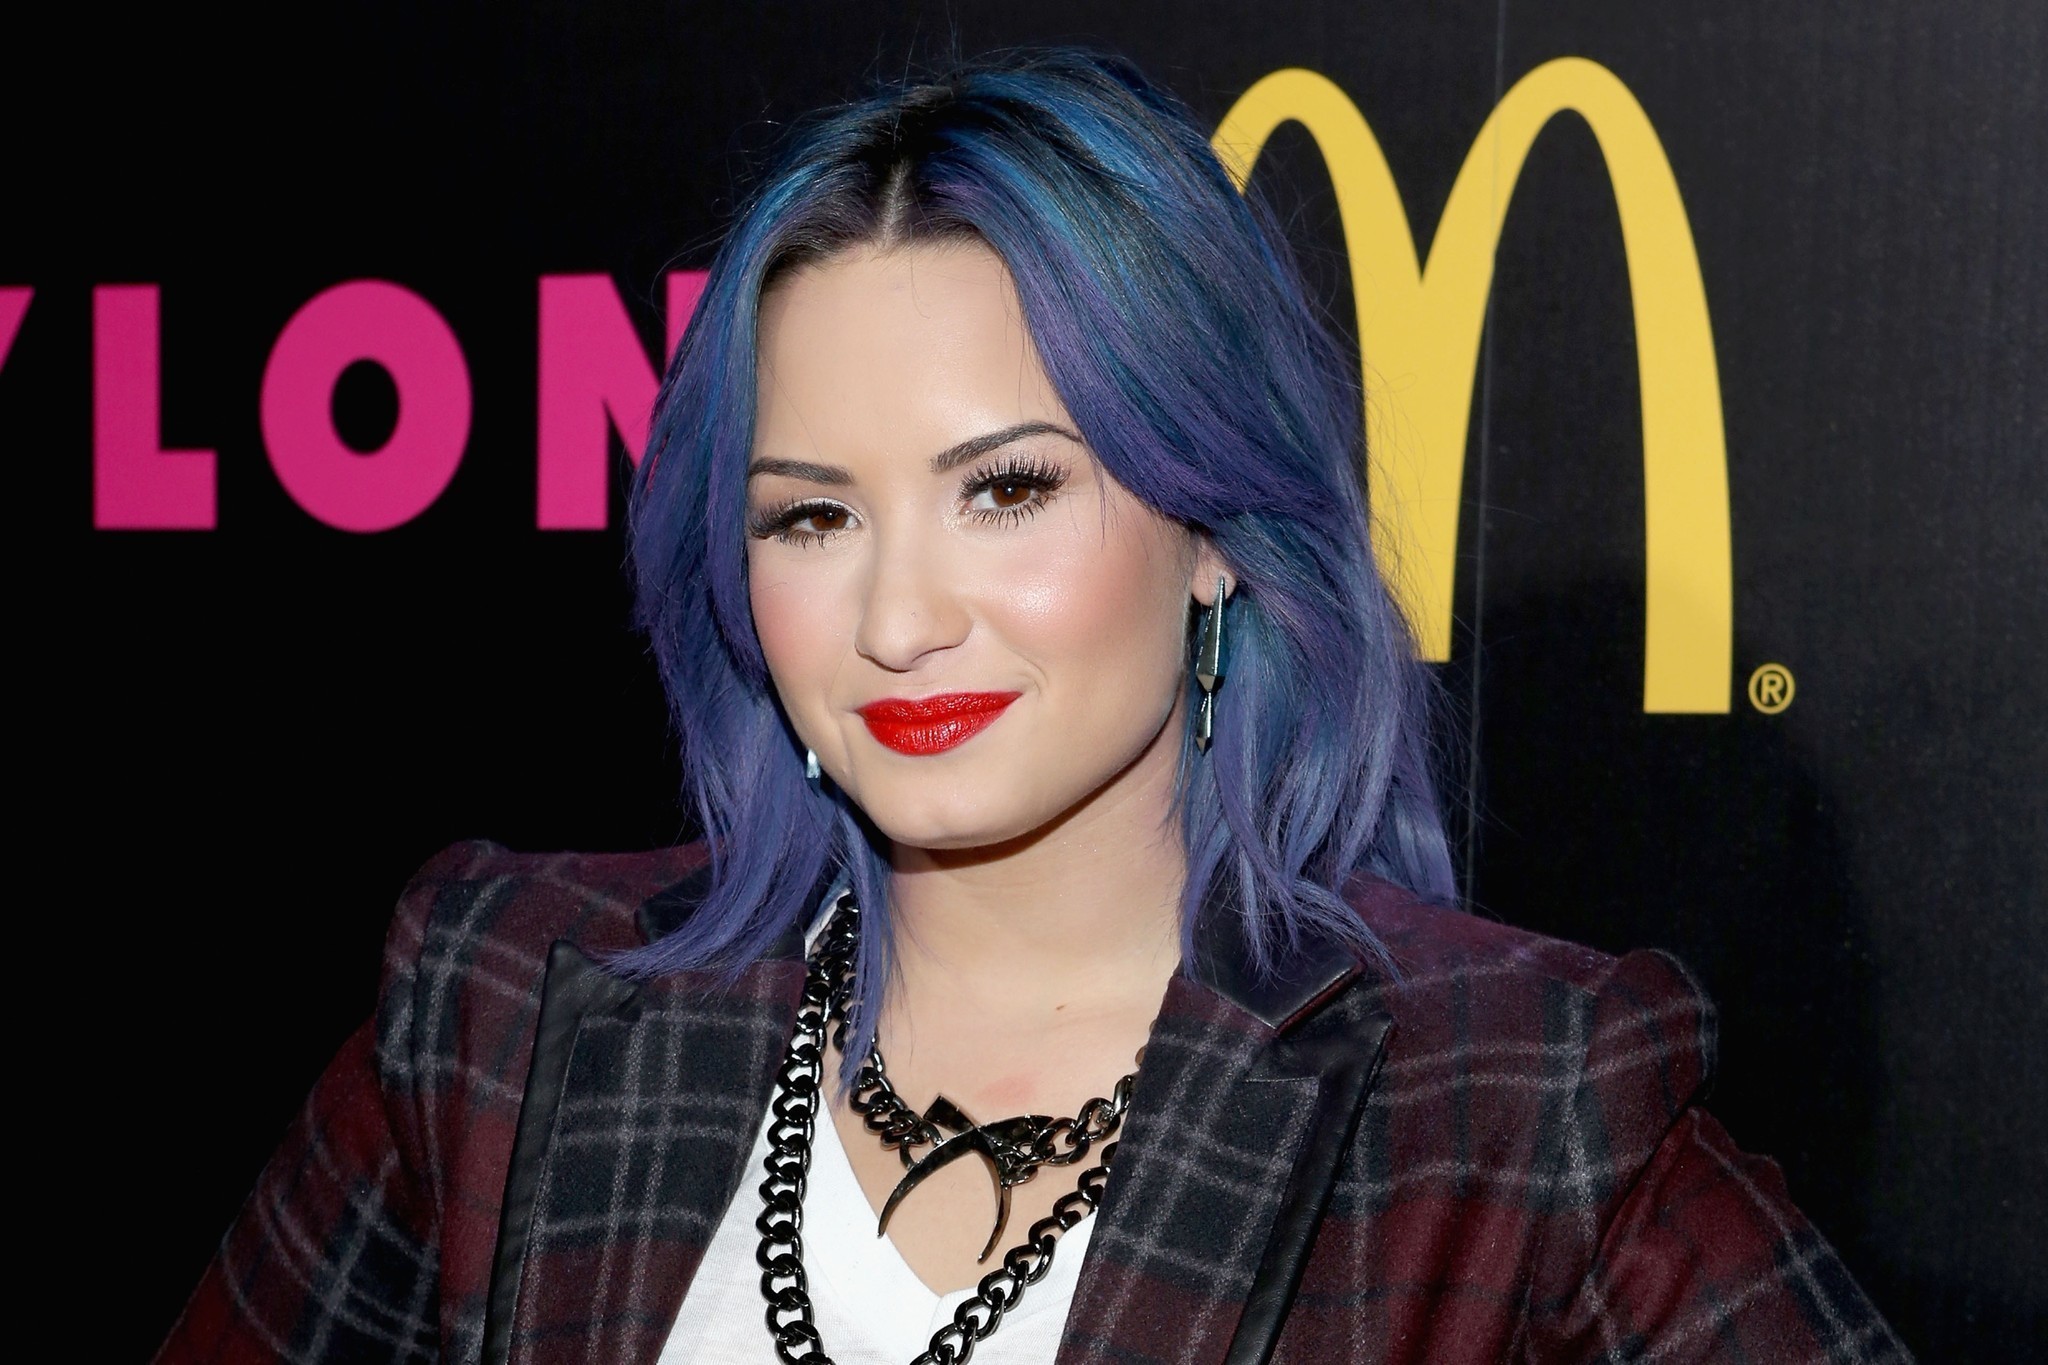 Demi Lovato opens up about heavy use of cocaine, alcohol - Chicago Tribune